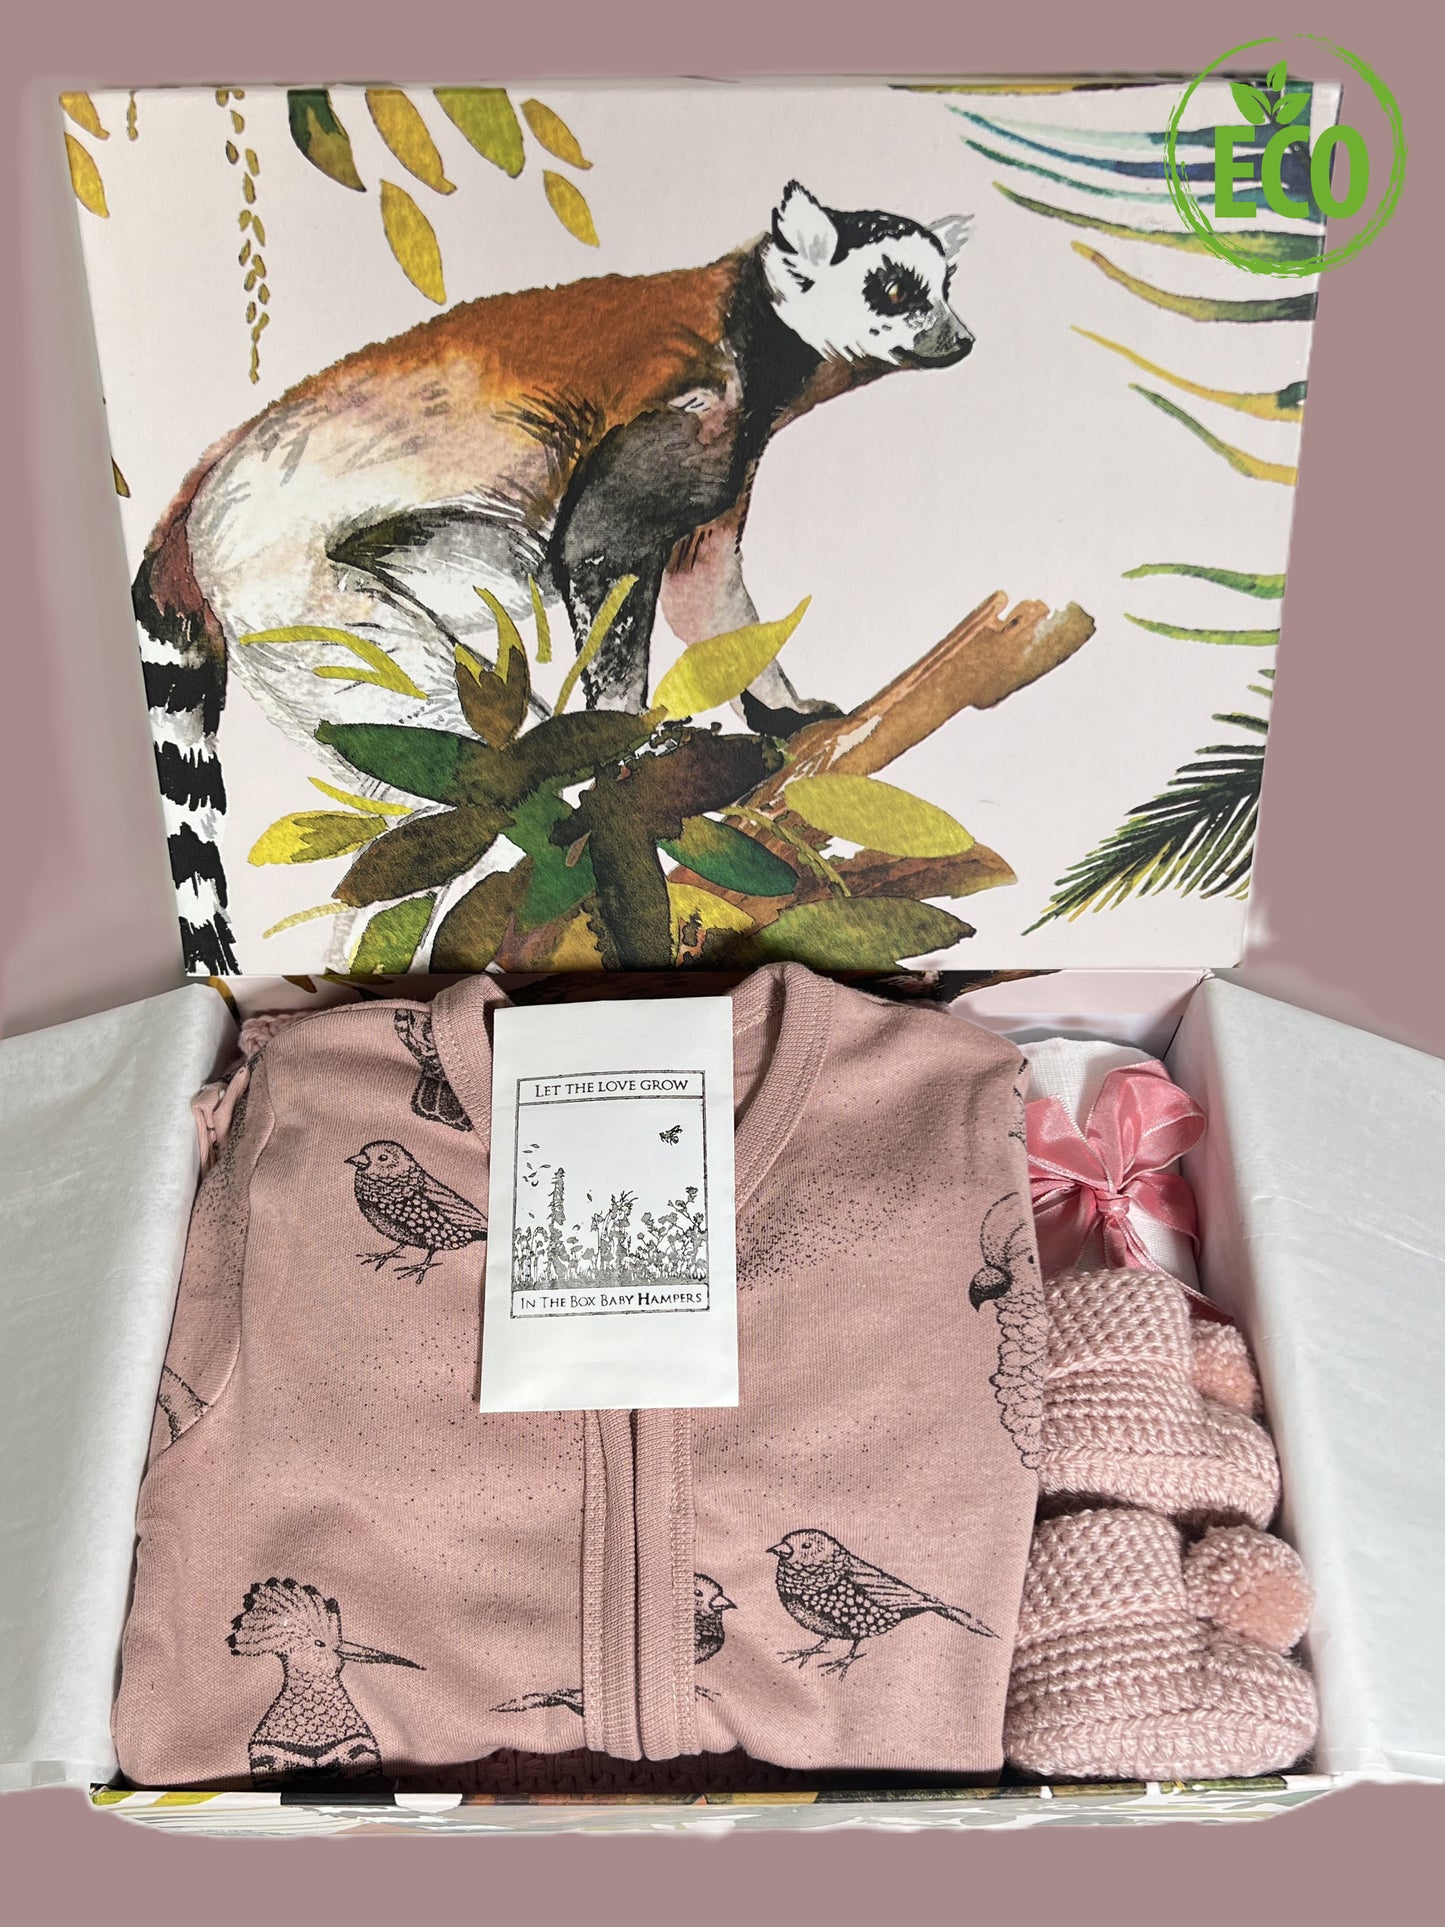 Grey cotton cellular baby blanket with a lovely dusky pink baby romper with exotic bird design, a muslin sqaure, a Choc Affair chocolate bar, a pair of crocheted baby booties with pompoms all in a handcrafted baby keepsake box with lima jungle print.